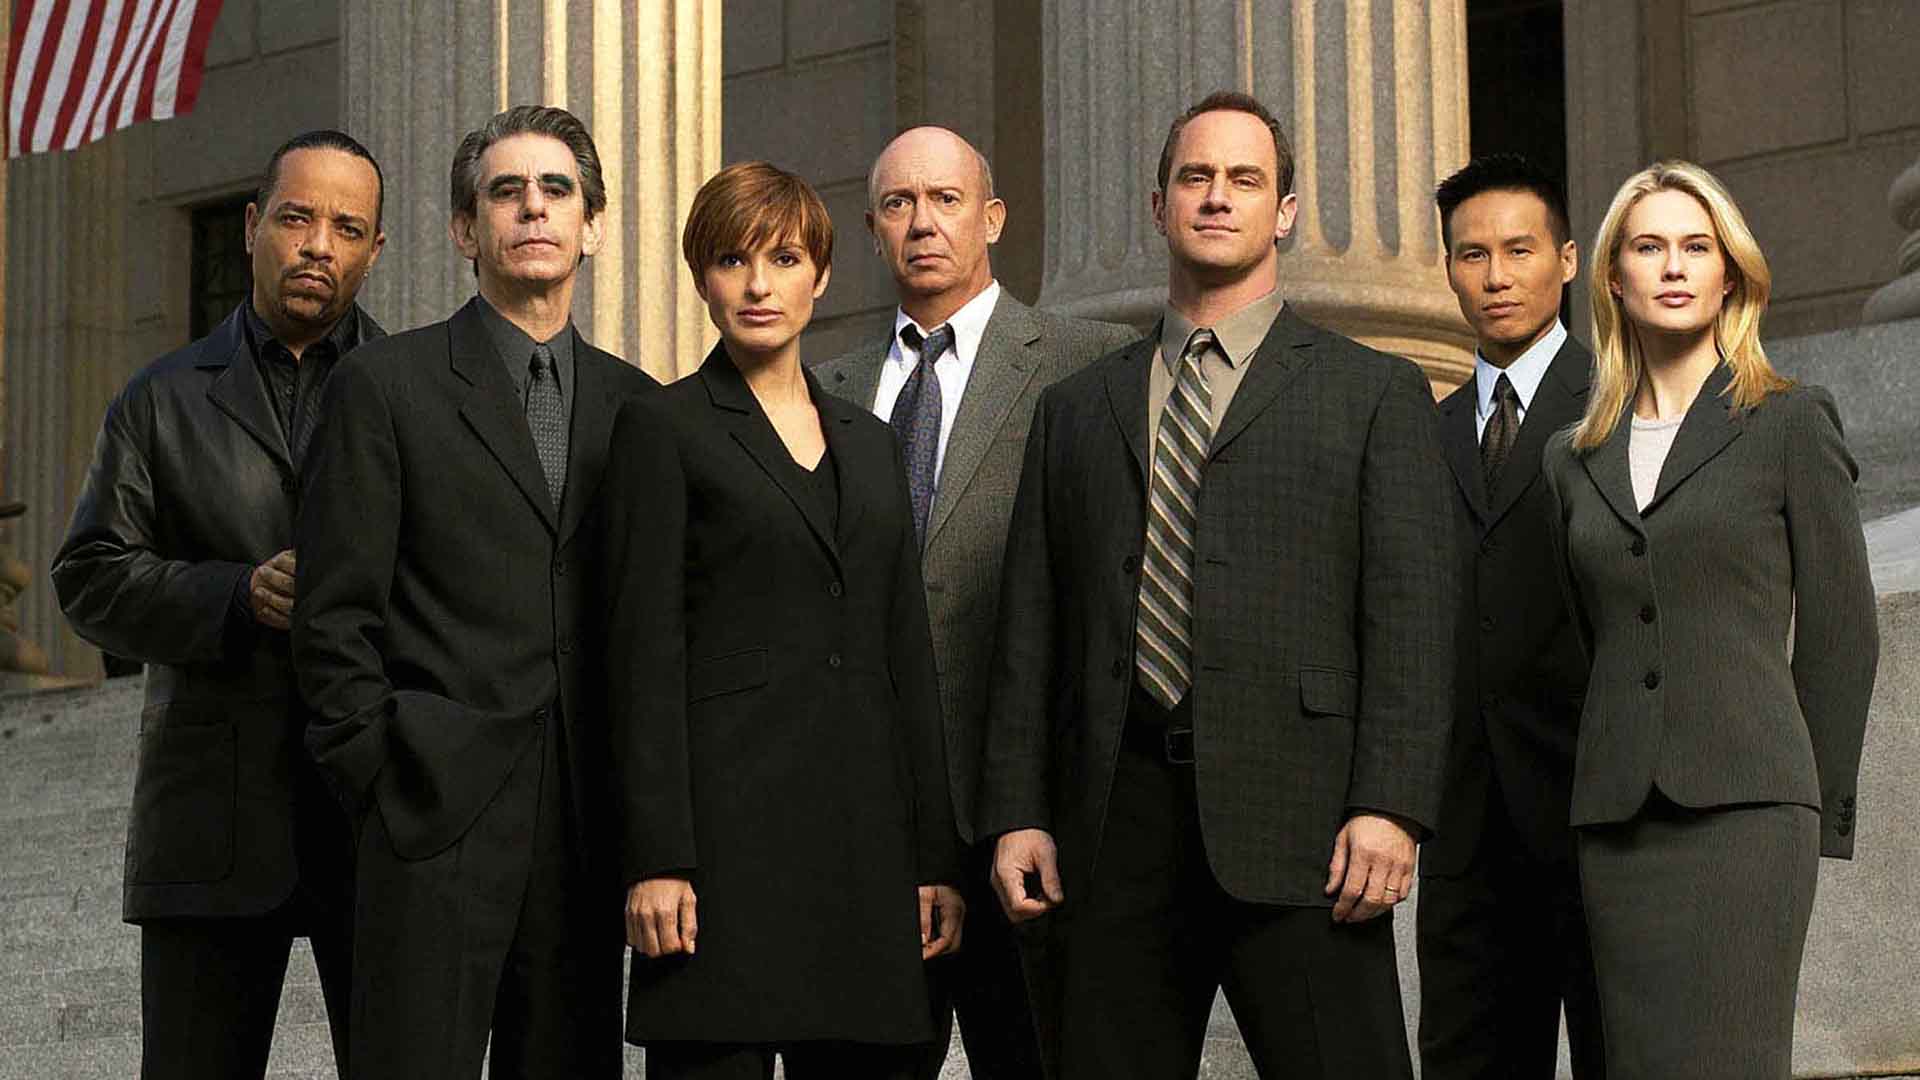 Did SVU Go Too Far? 7 Controversial Guest Stars that Divided Fans